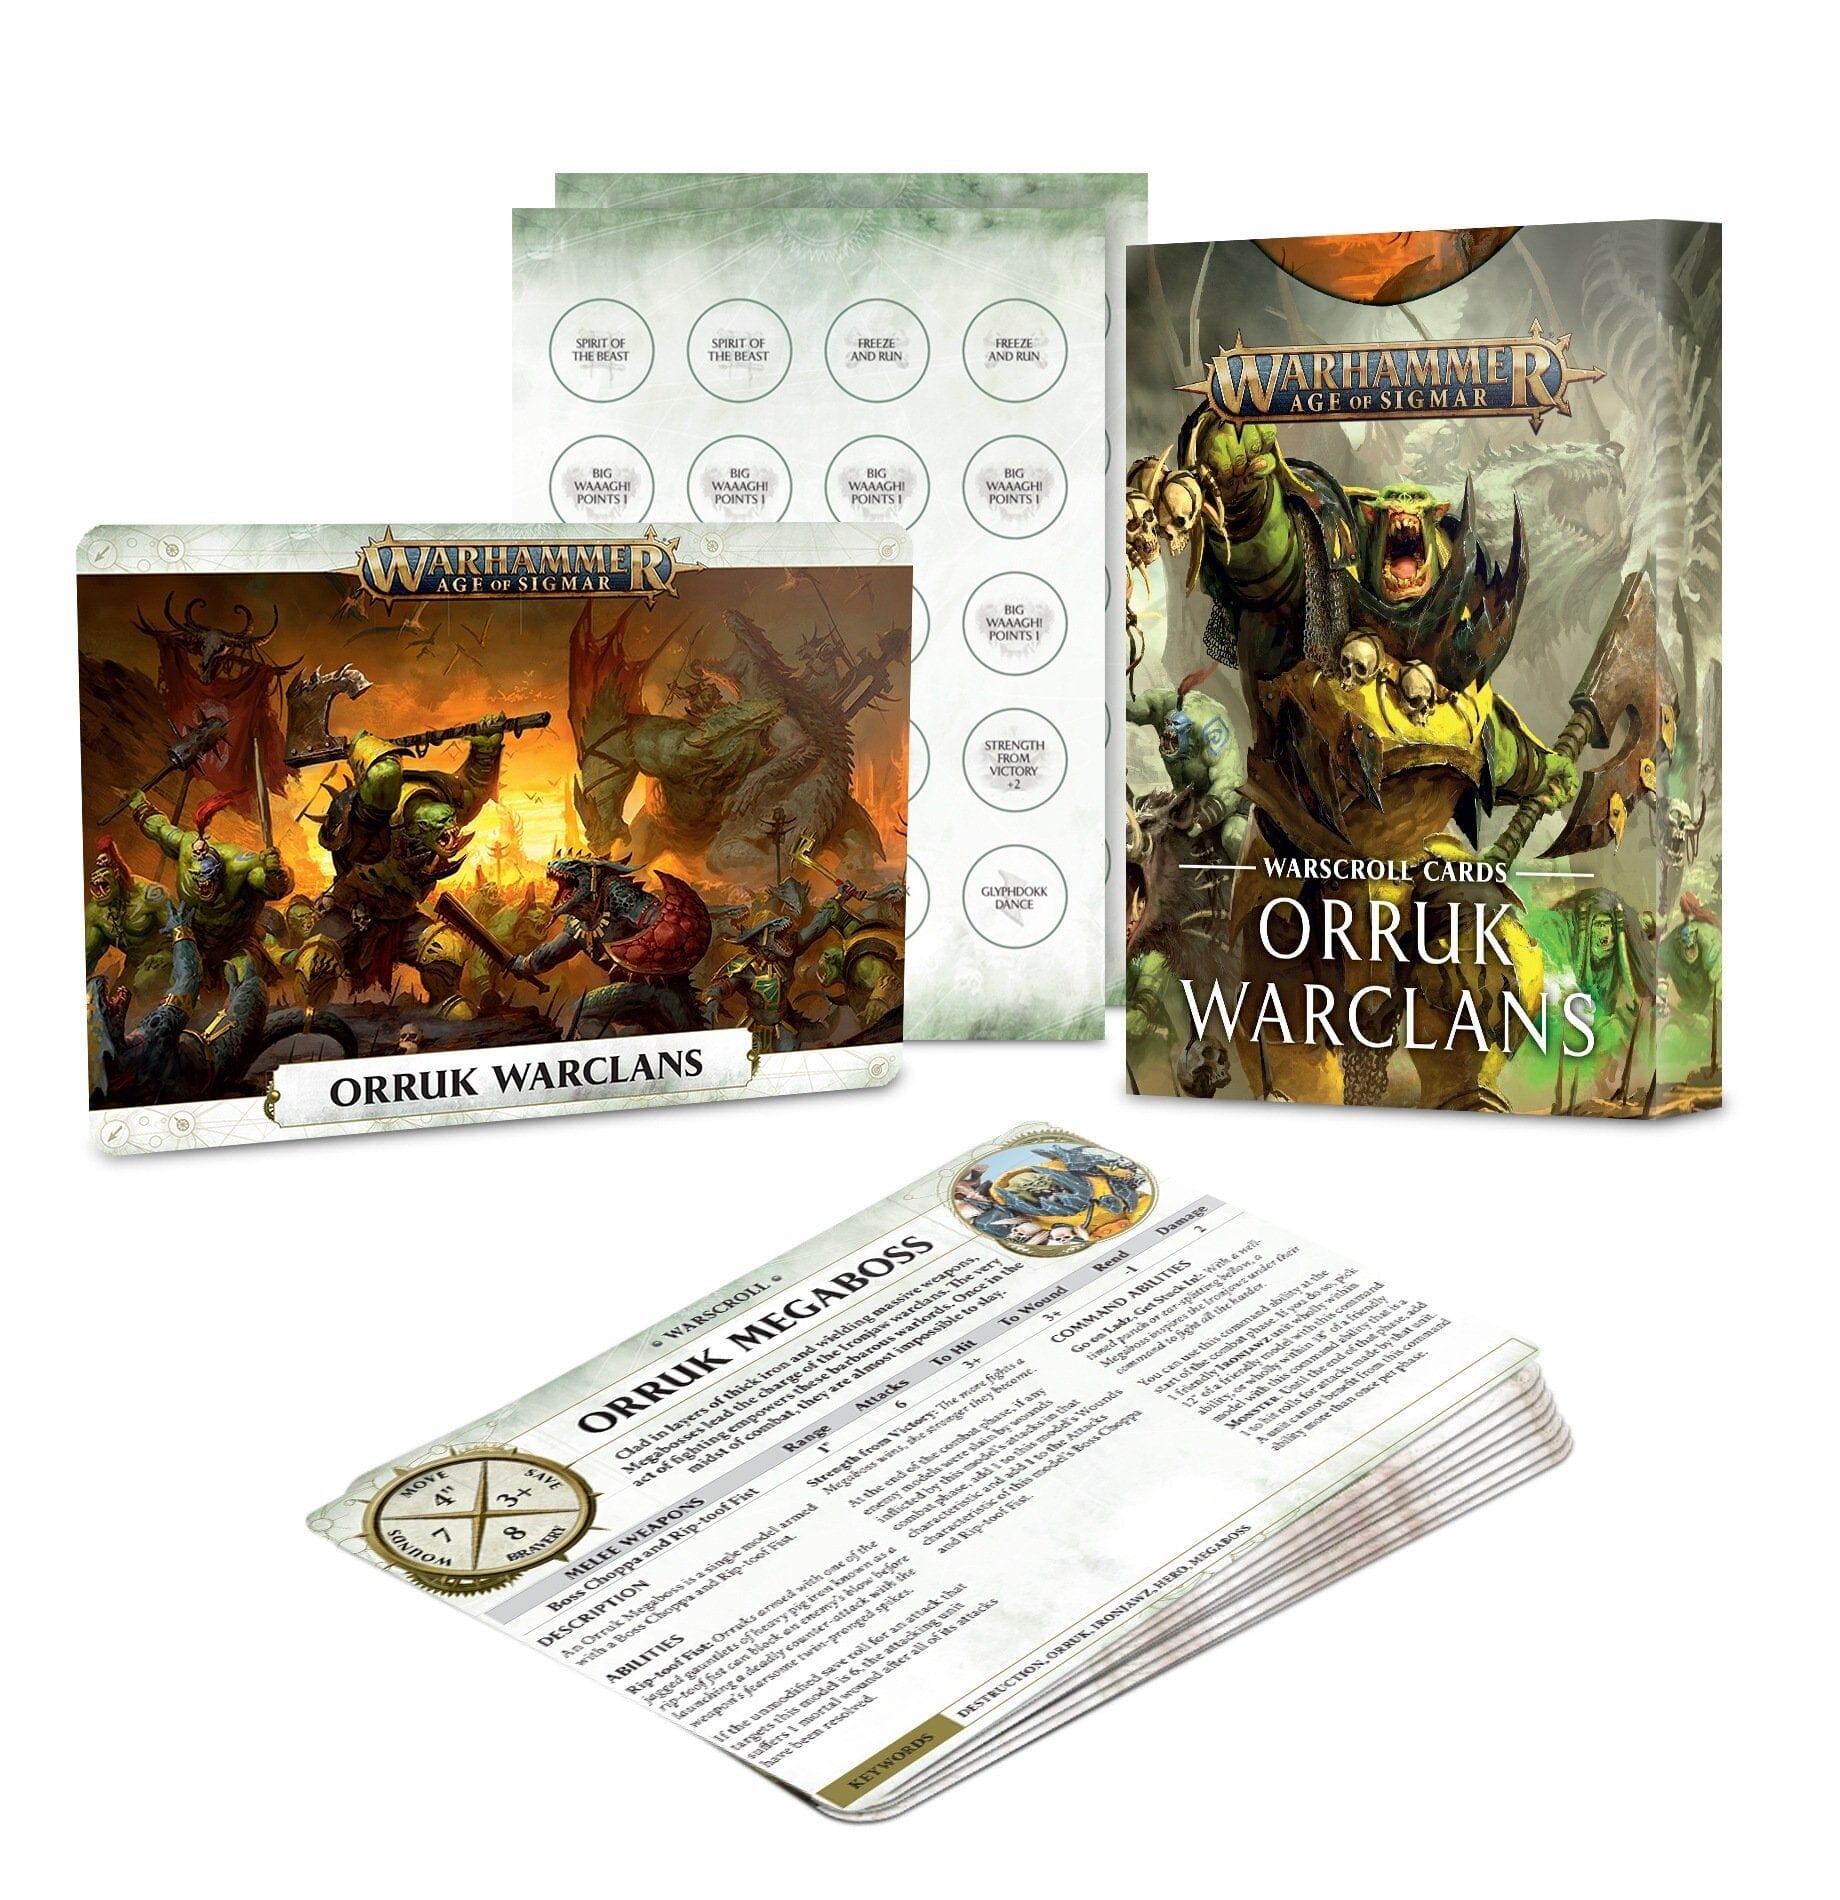 Warscroll Cards: Orruk Warclans Accessories|Accessoires Games Workshop  | Multizone: Comics And Games